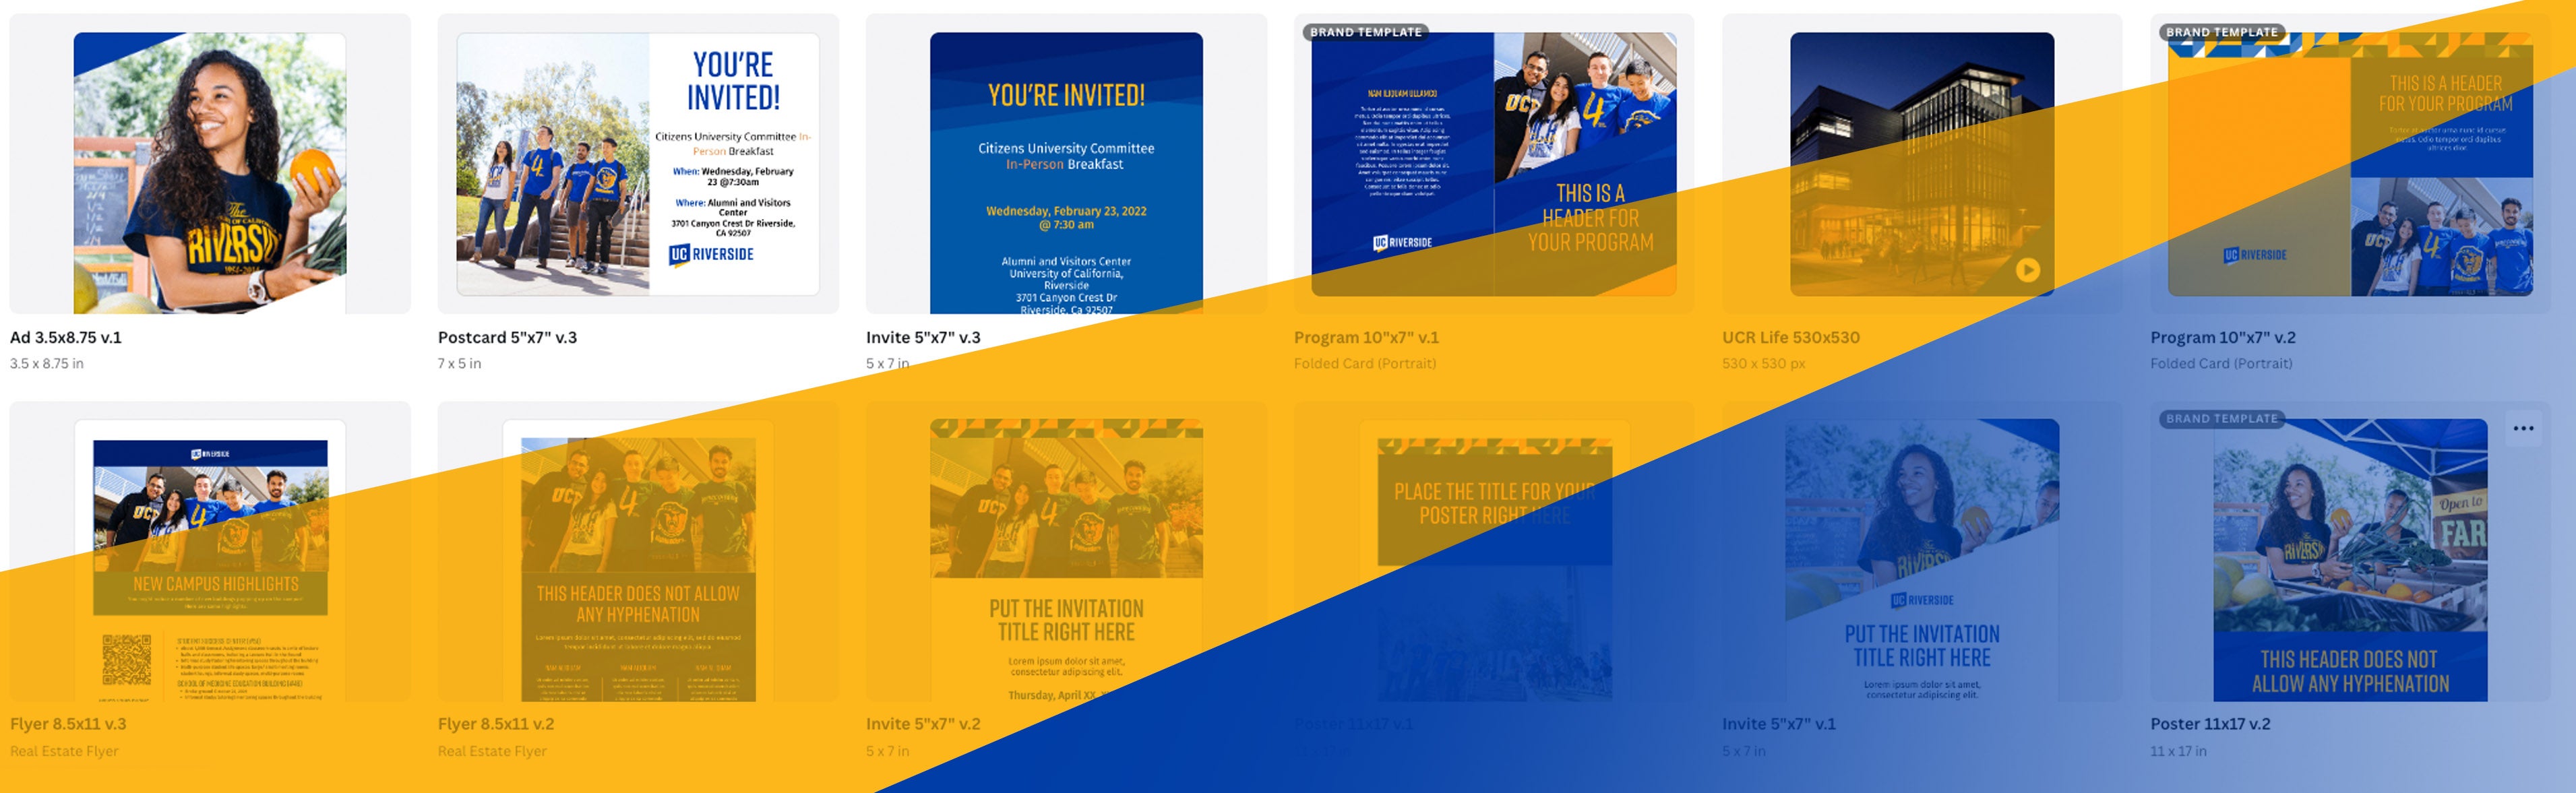 Image of UC Riverside branded templates within Canva's interface